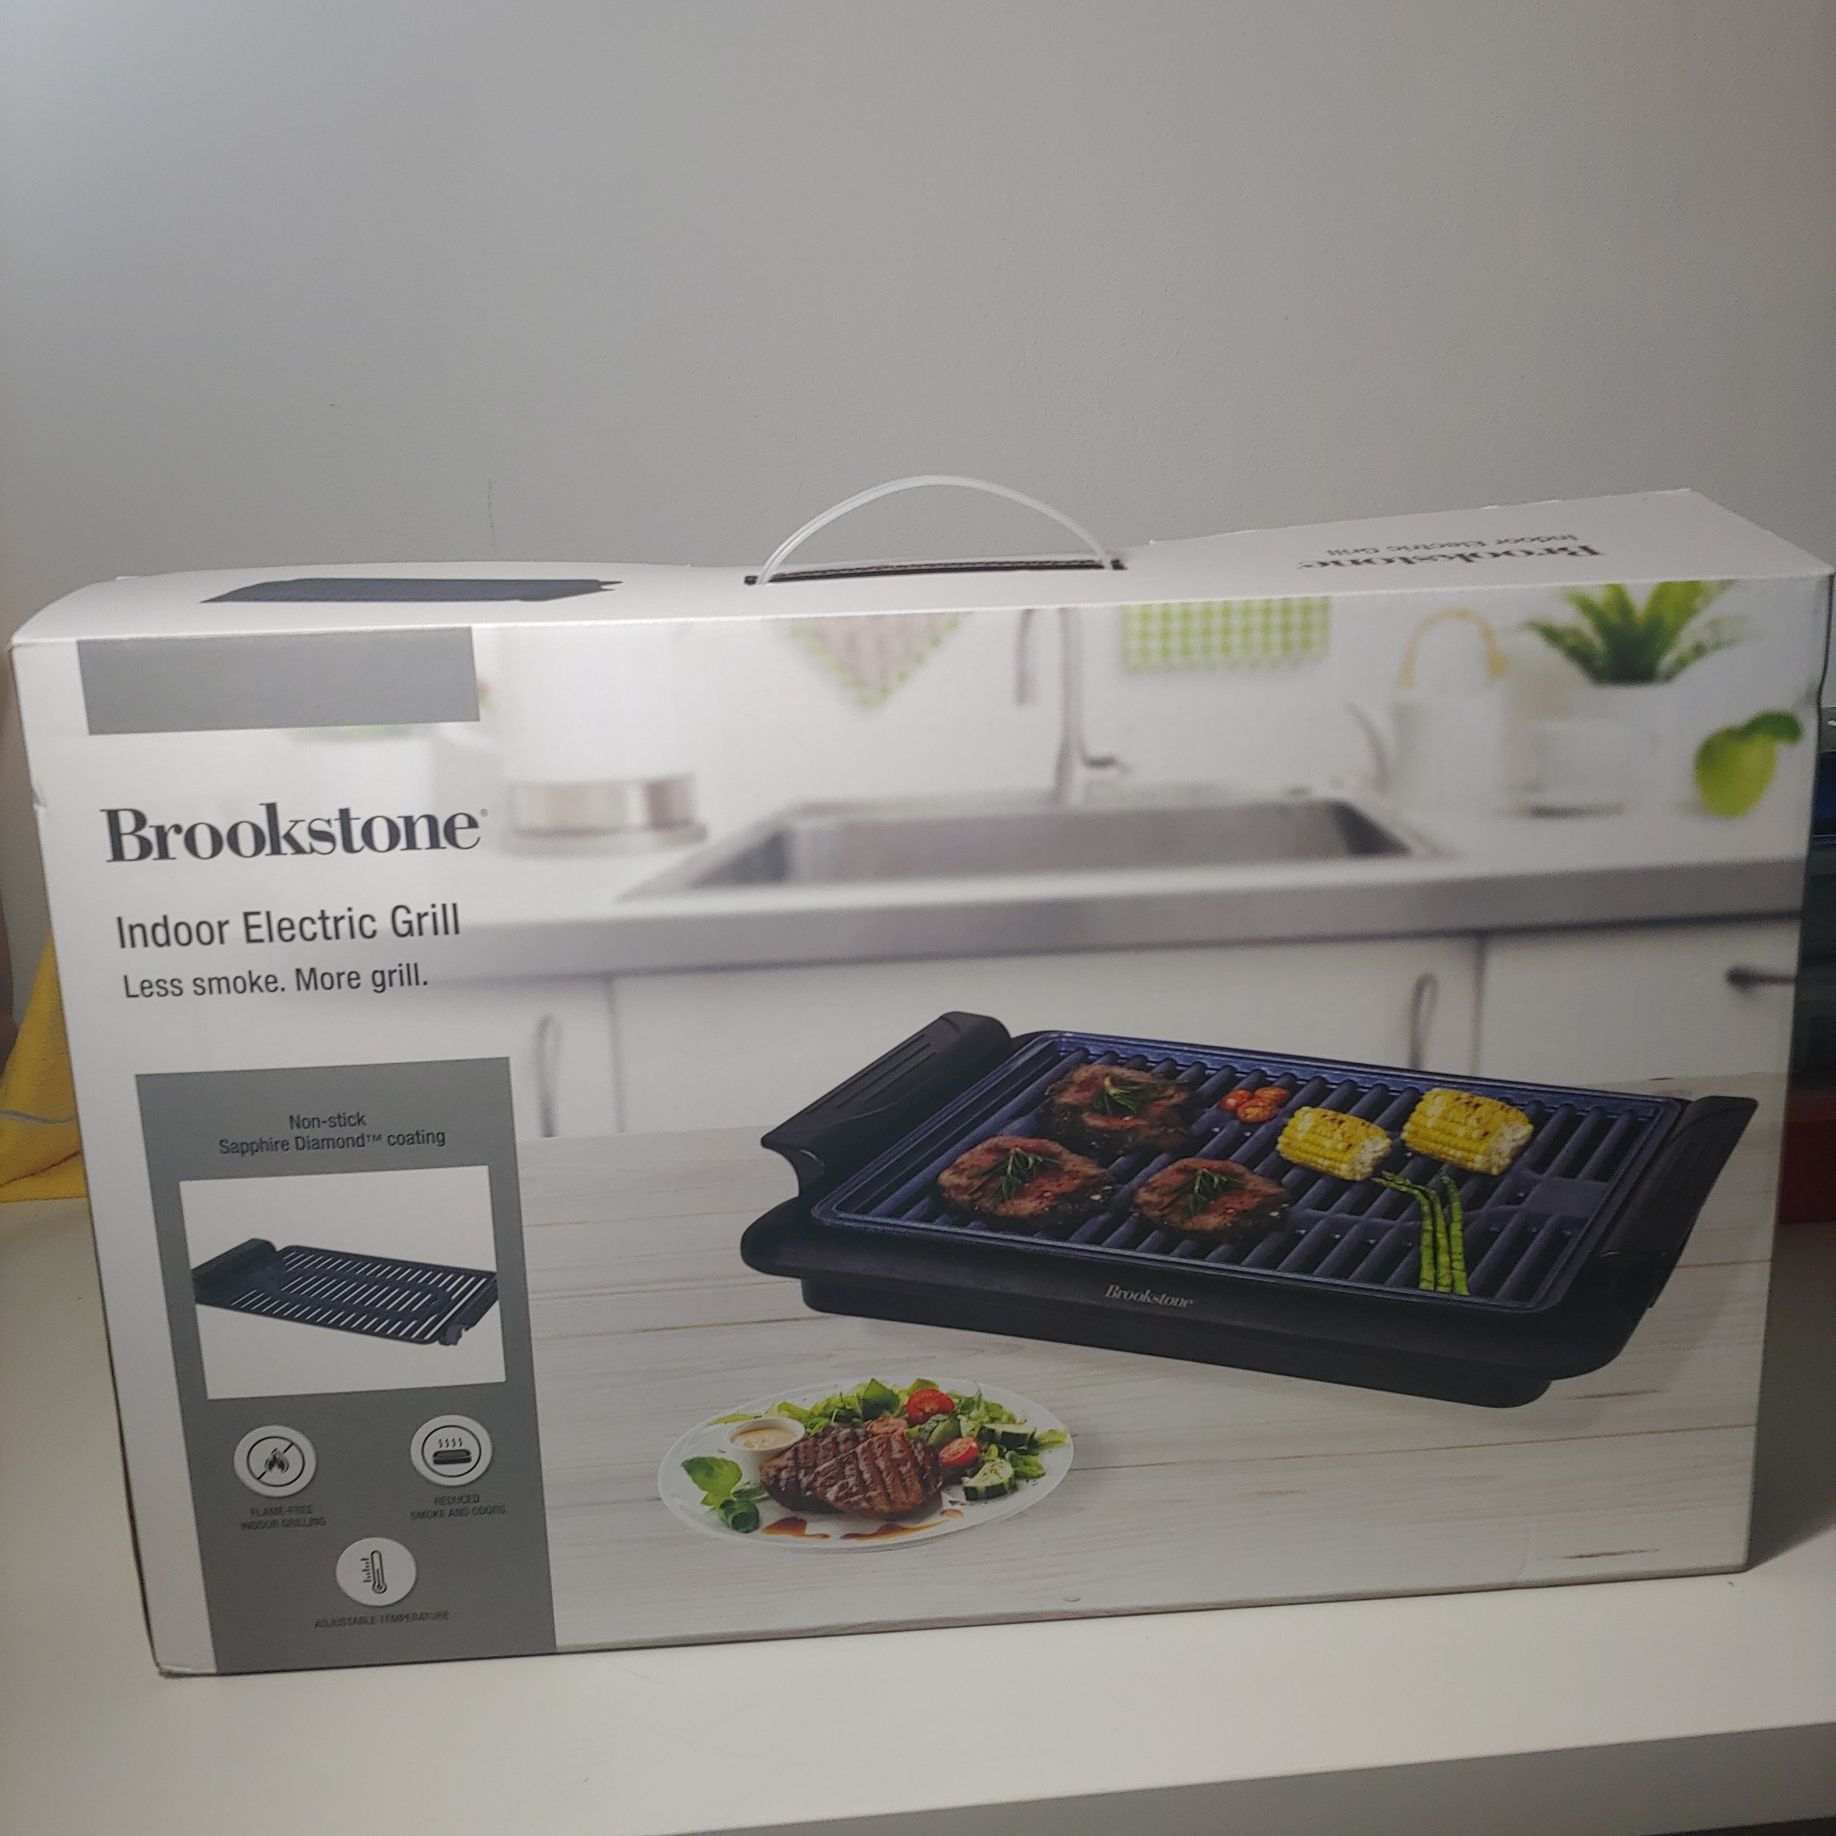 New Brookstone Indoor Electric Grill